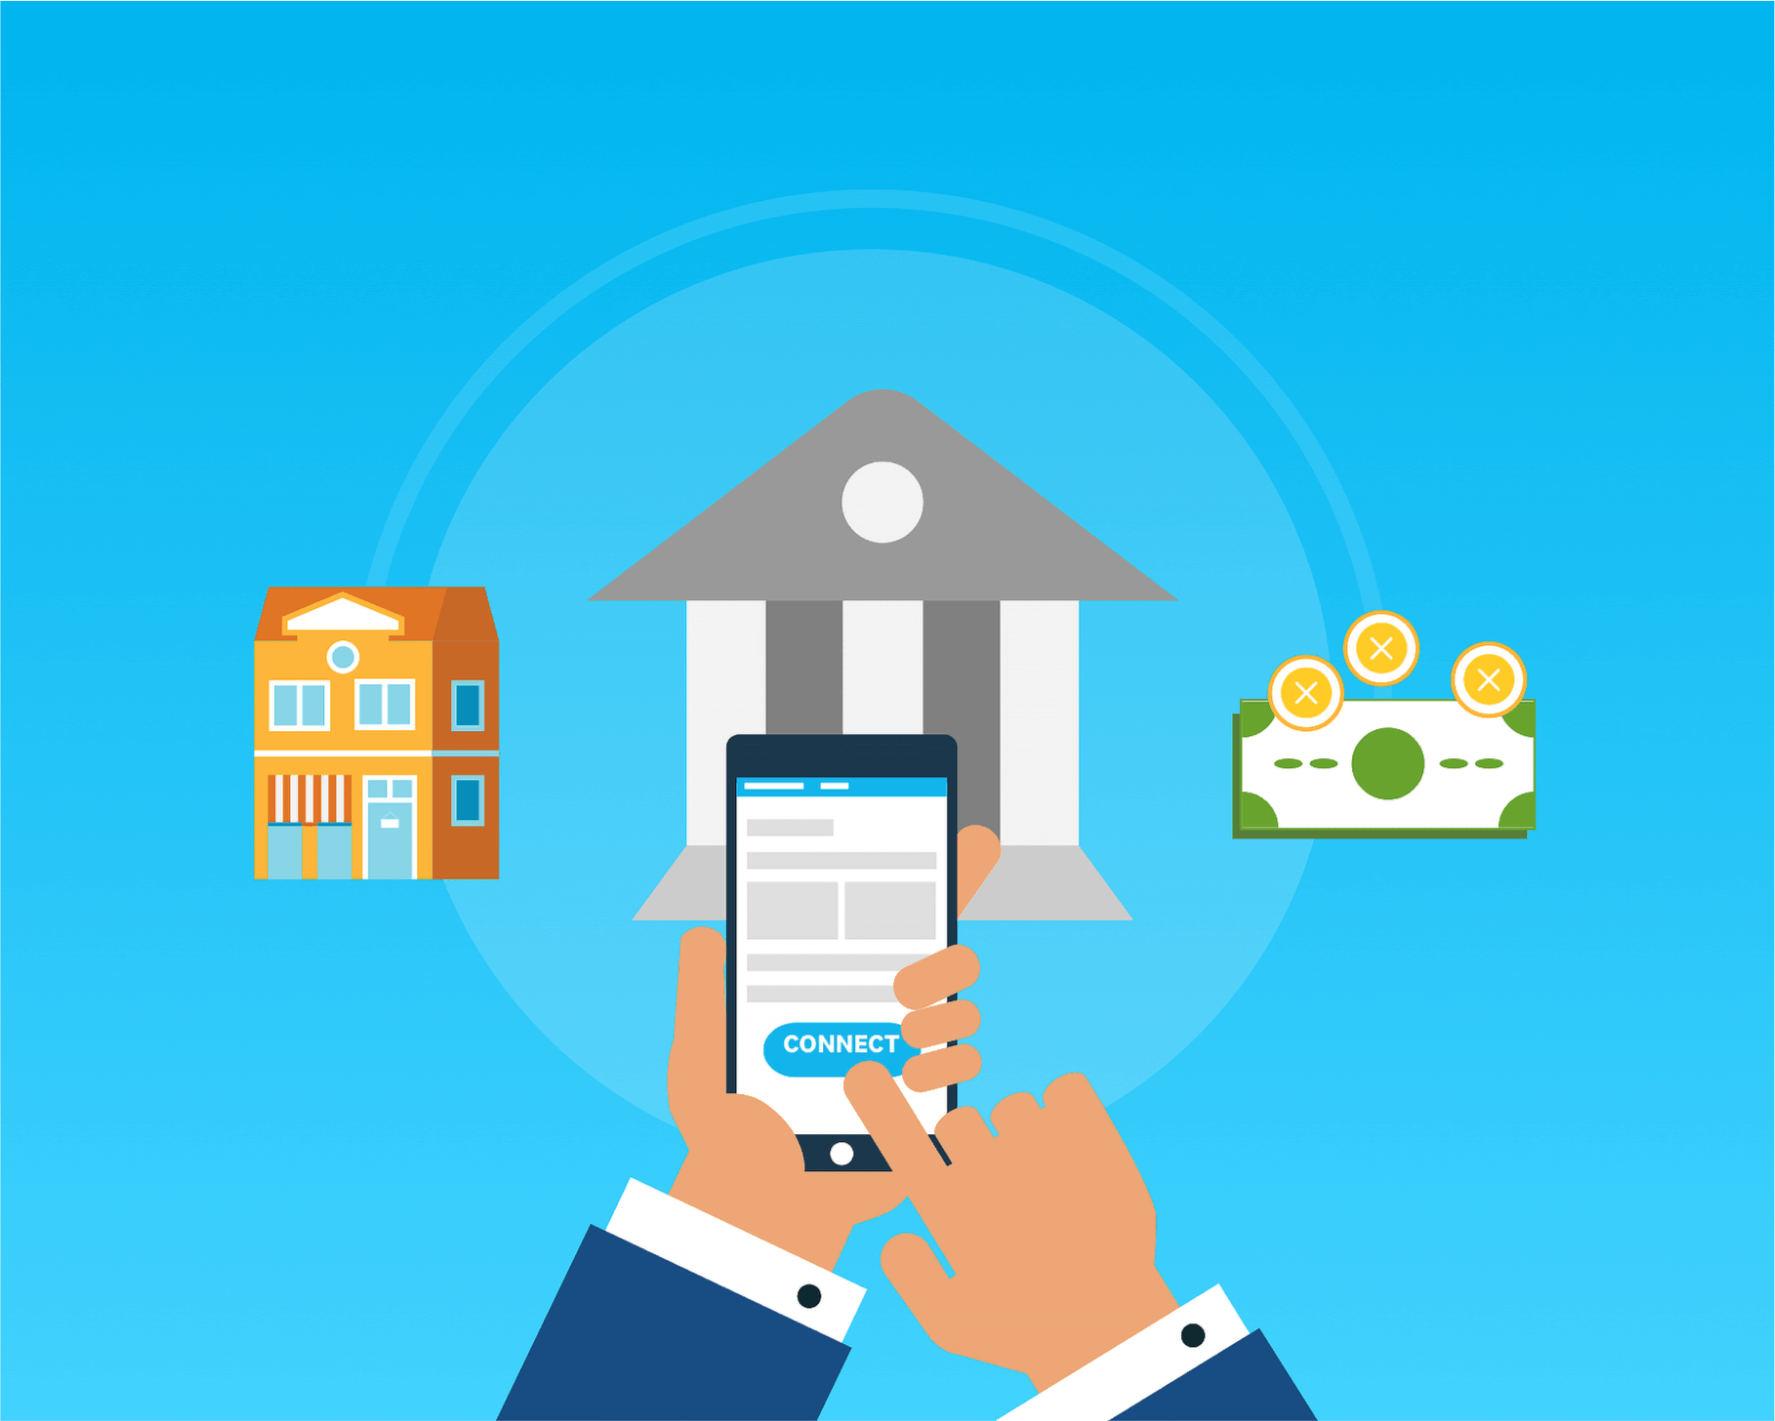 Using Xero to share data with banks can streamline the process of getting small business finance.